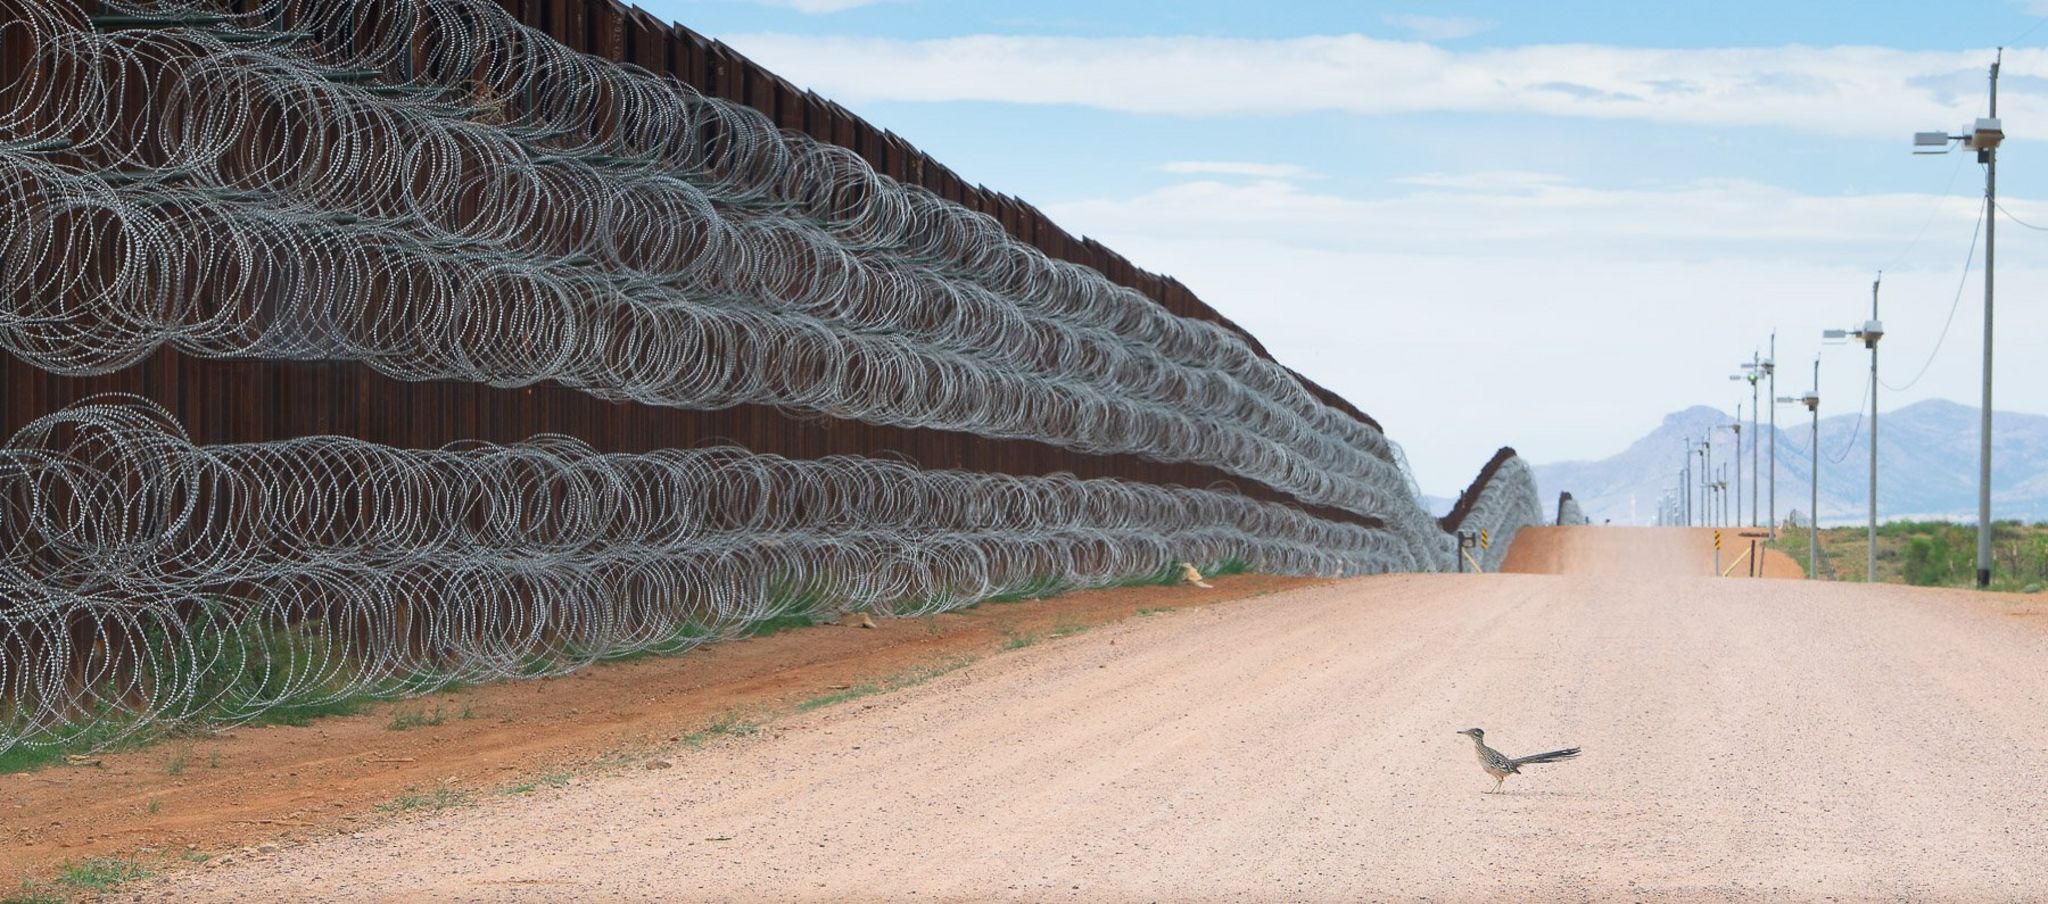 A roadrunner stopped in its tracks by the USA-Mexico border wall